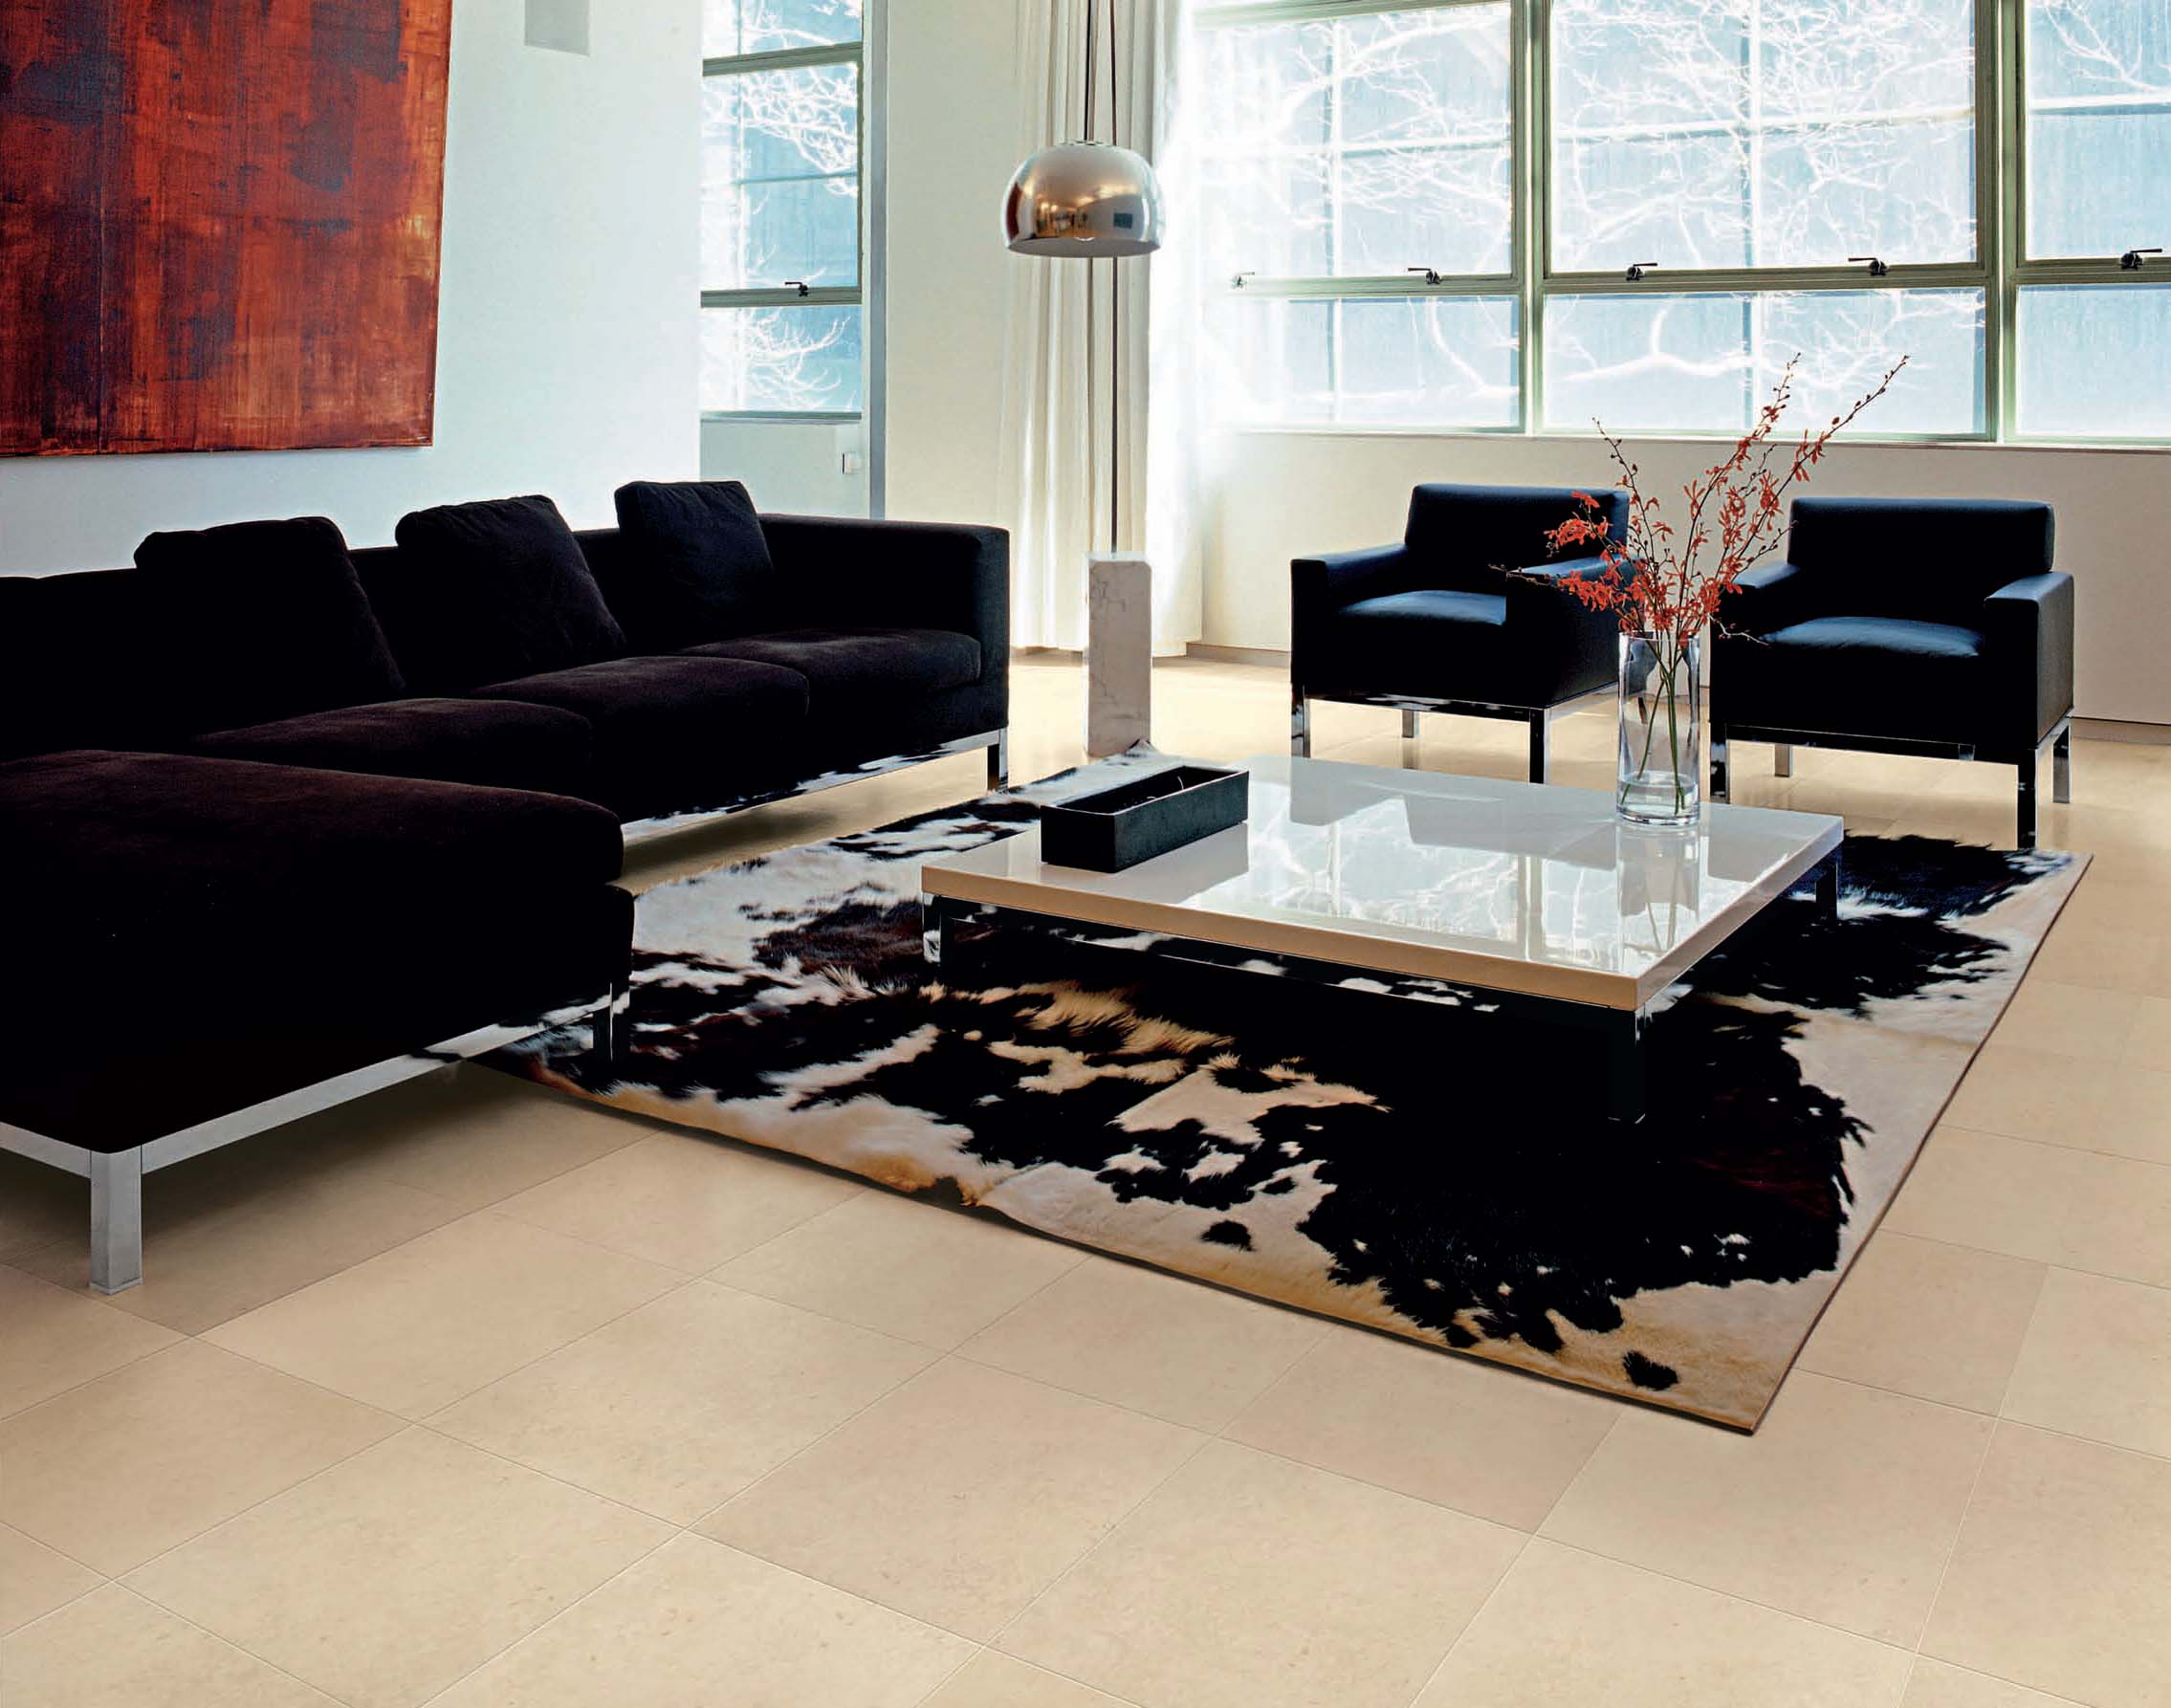 Emileceramica has caught the exclusive style of the Milanese design in this floor tile line design for elegant, timeless homes with fine interiors featuring a decidedly glamour style.